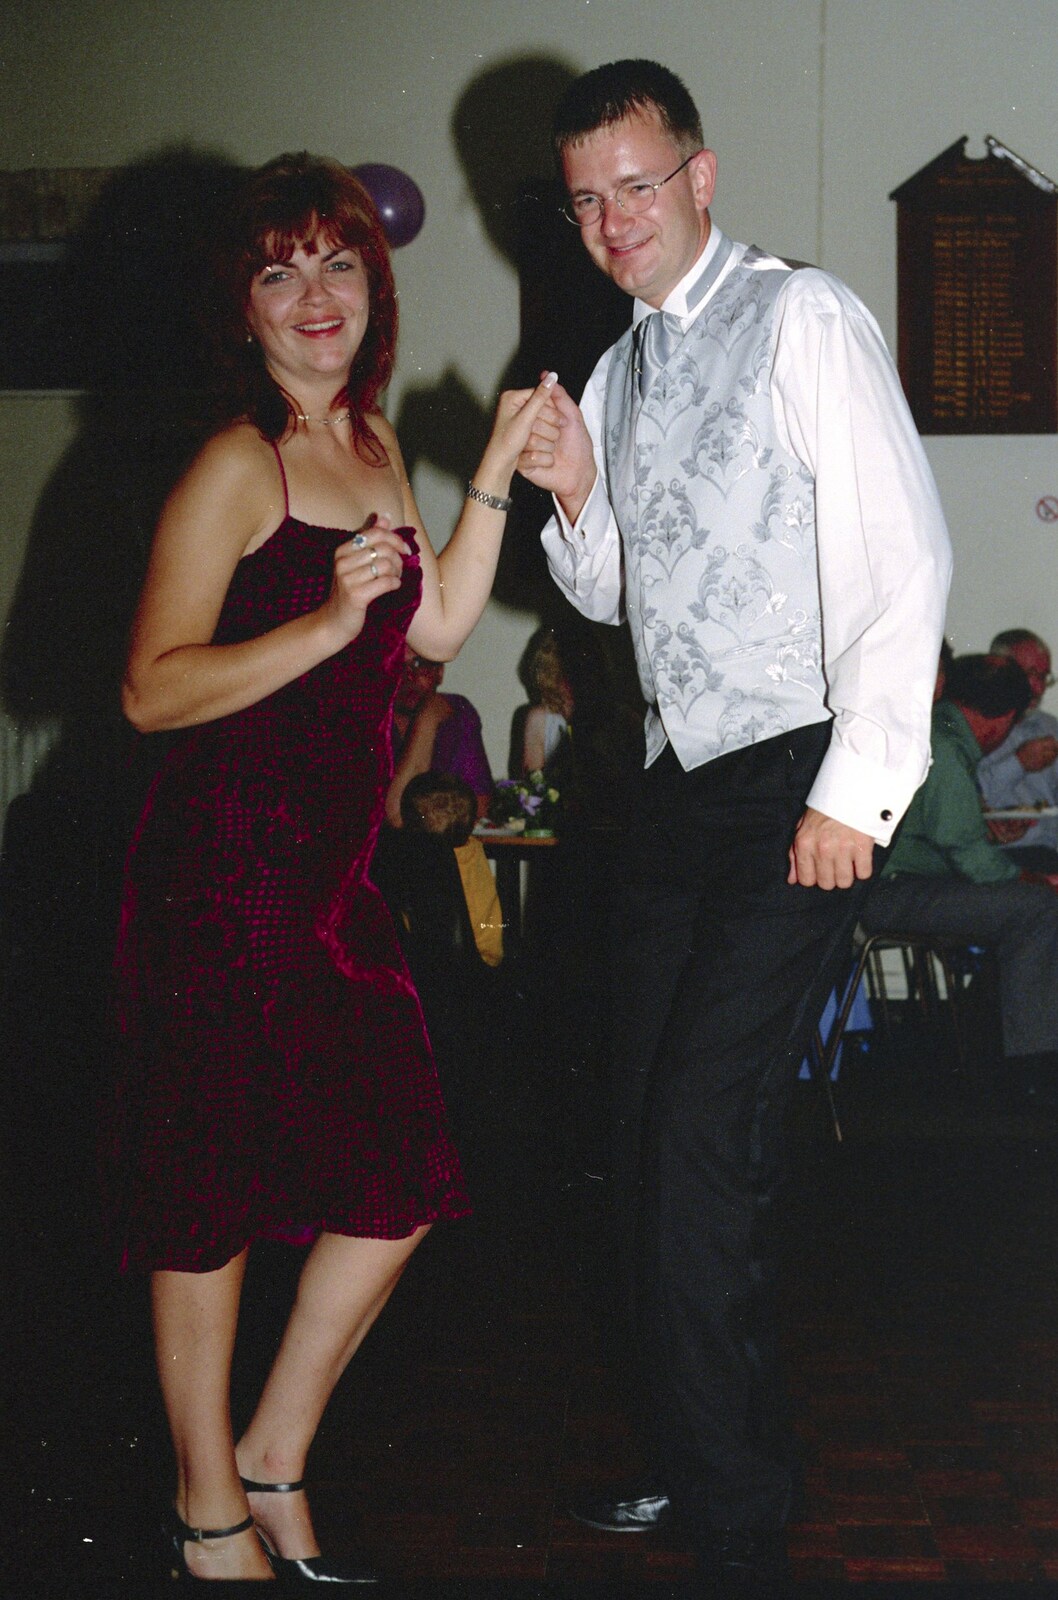 Michelle and Nosher dance about from Sean and Michelle's Wedding, Bashley FC, New Milton - 12th August 2000